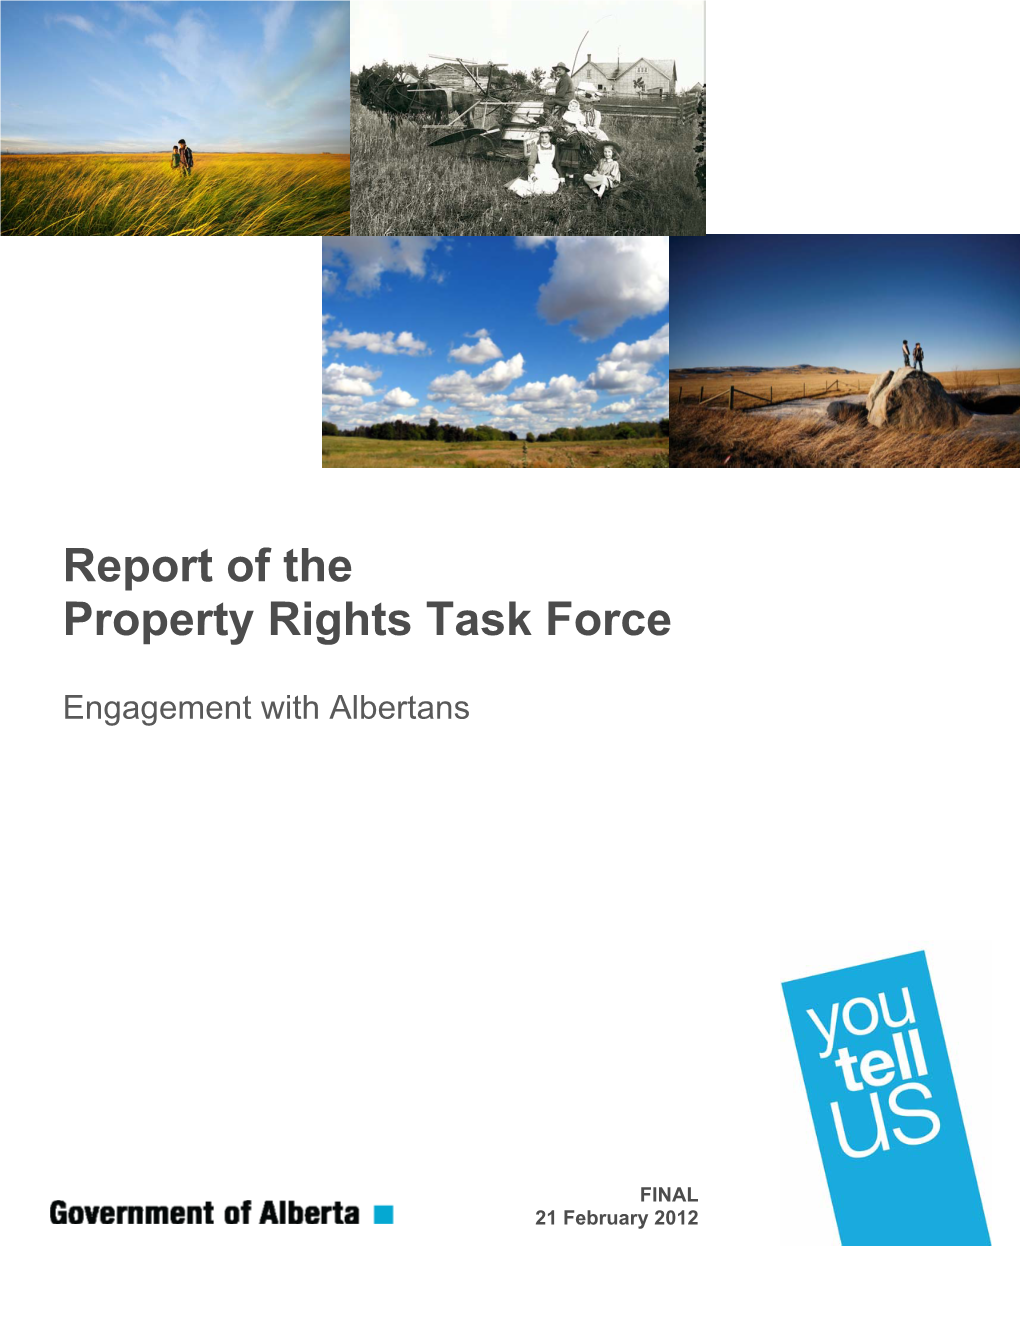 Property Rights Task Force Report